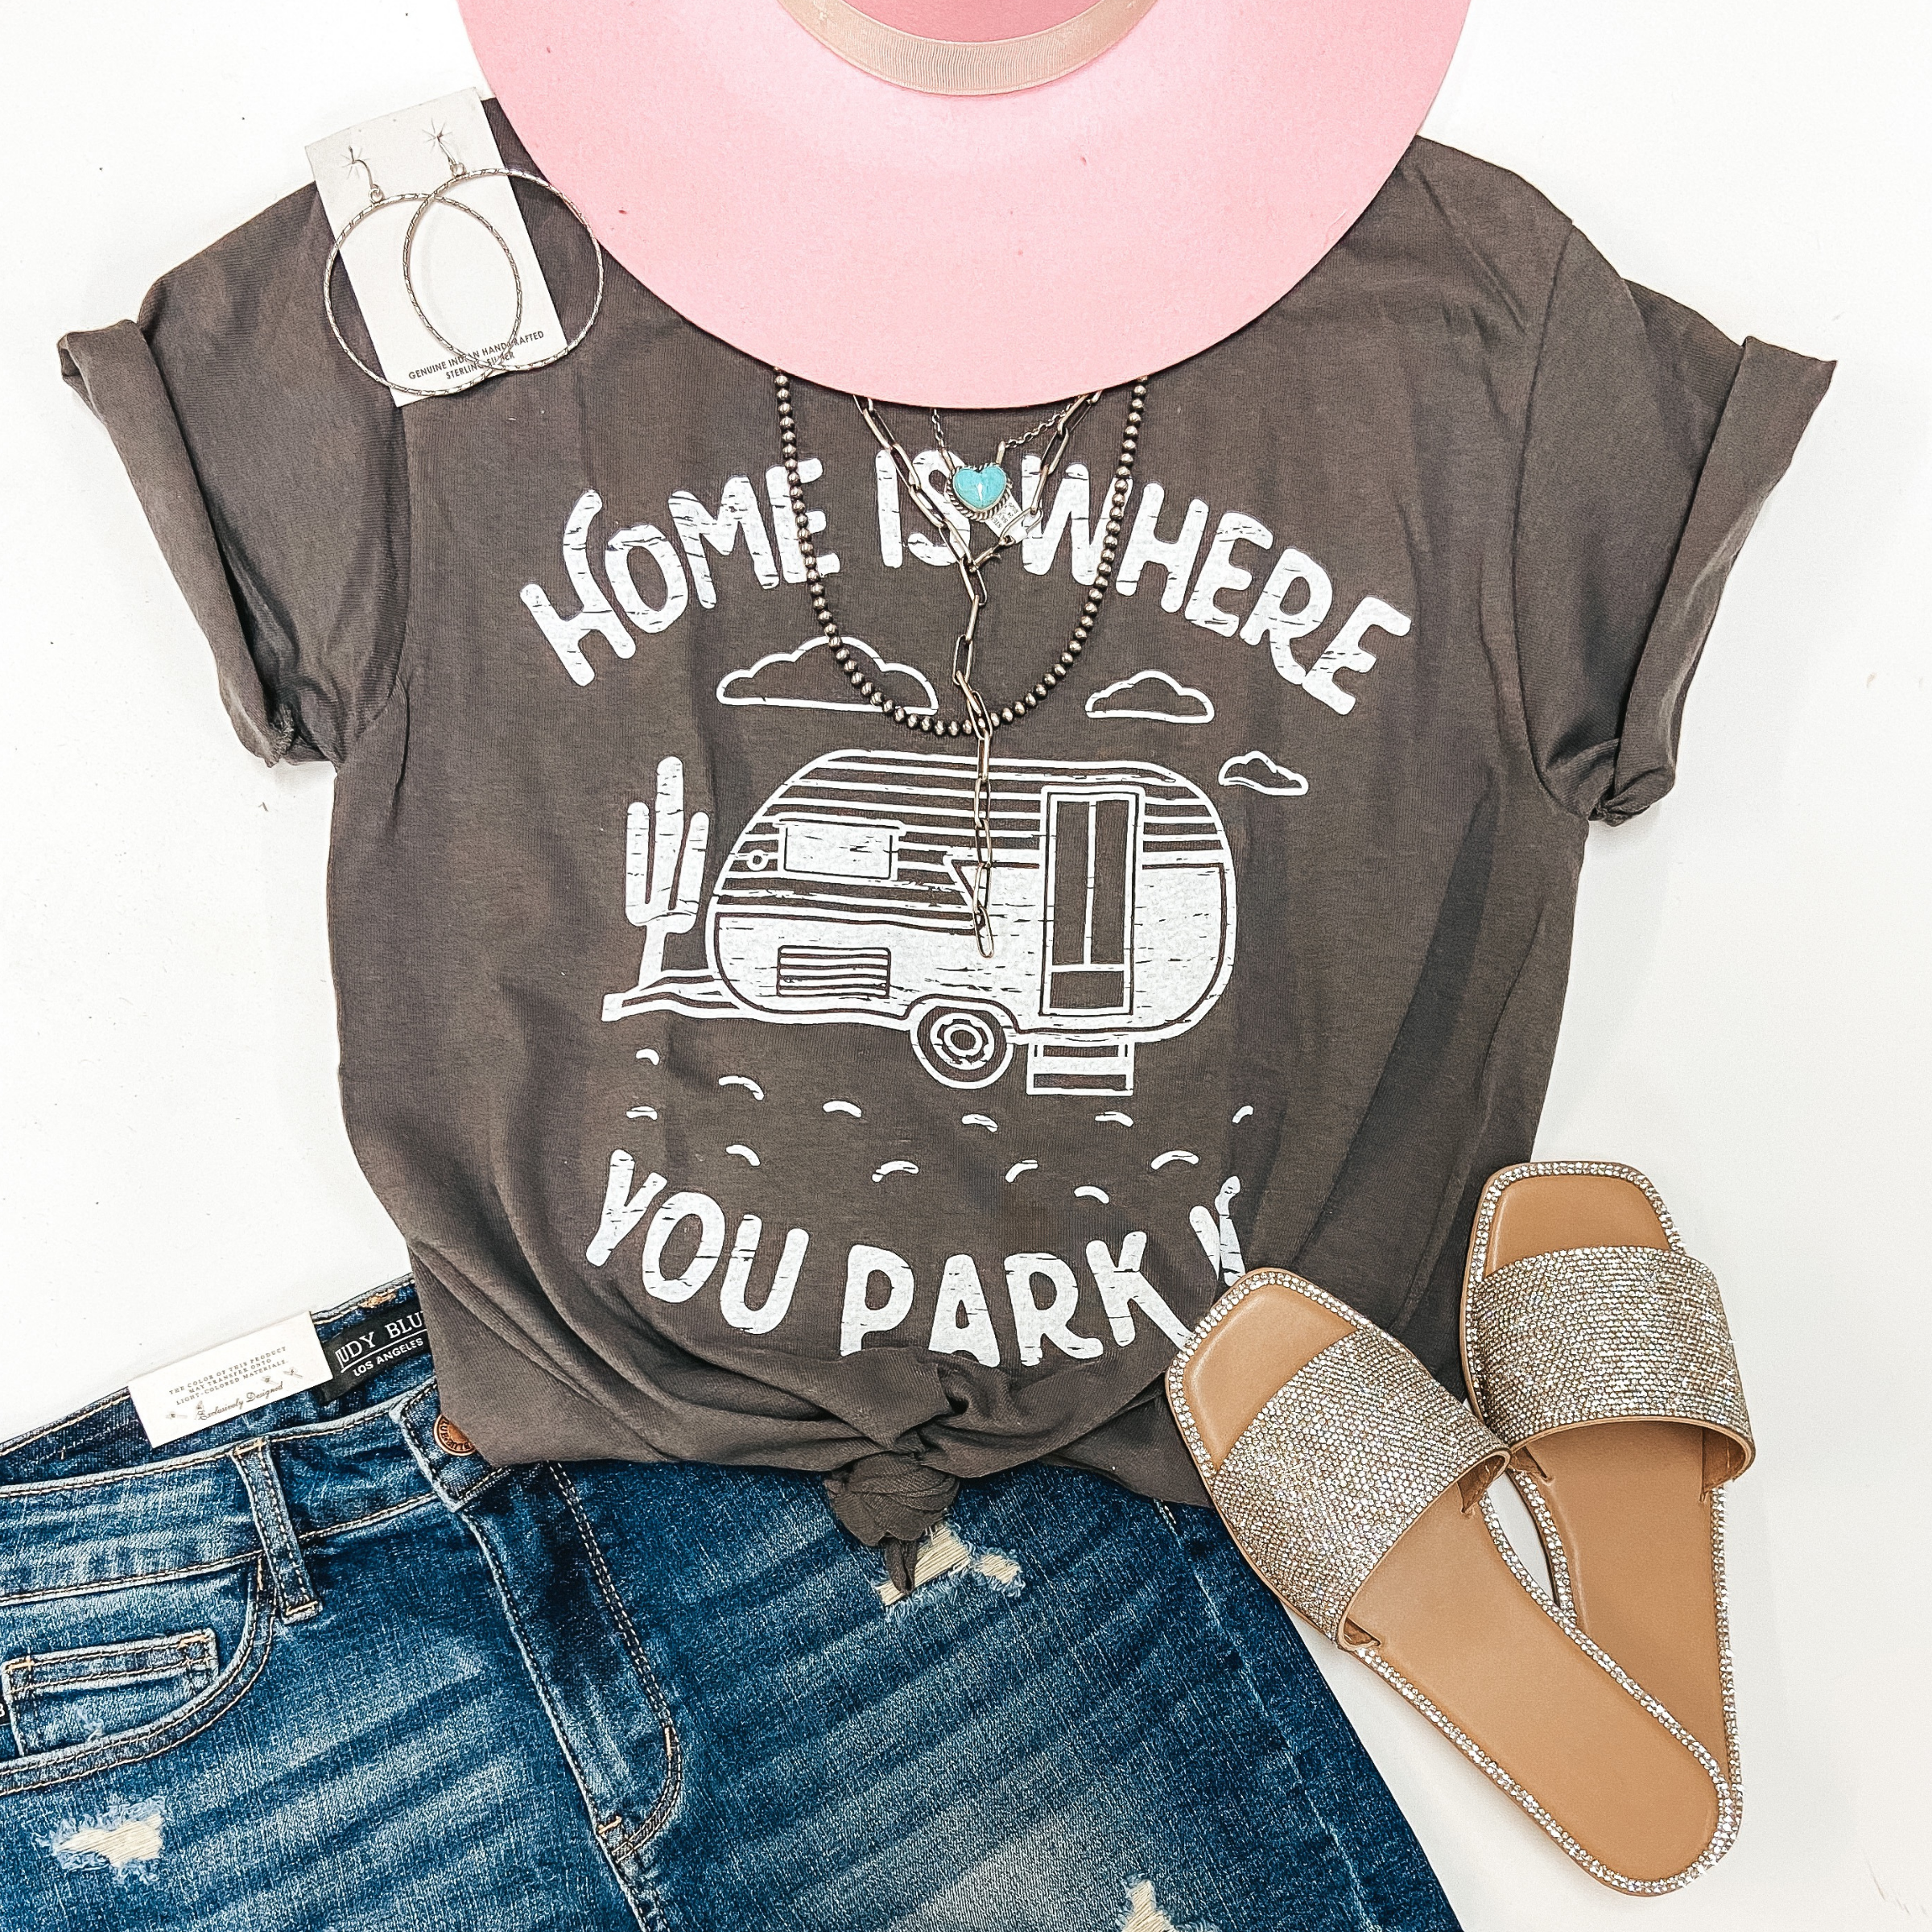 A grey graphic tee that has the sleeves rolled and a knot on the front. The tee shirt has a camper and cactus graphic and says "Home Is Where You Park It." Tee shirt is pictured on white background with a pink hat, silver jewelry, denim shorts, and crystal sandals.